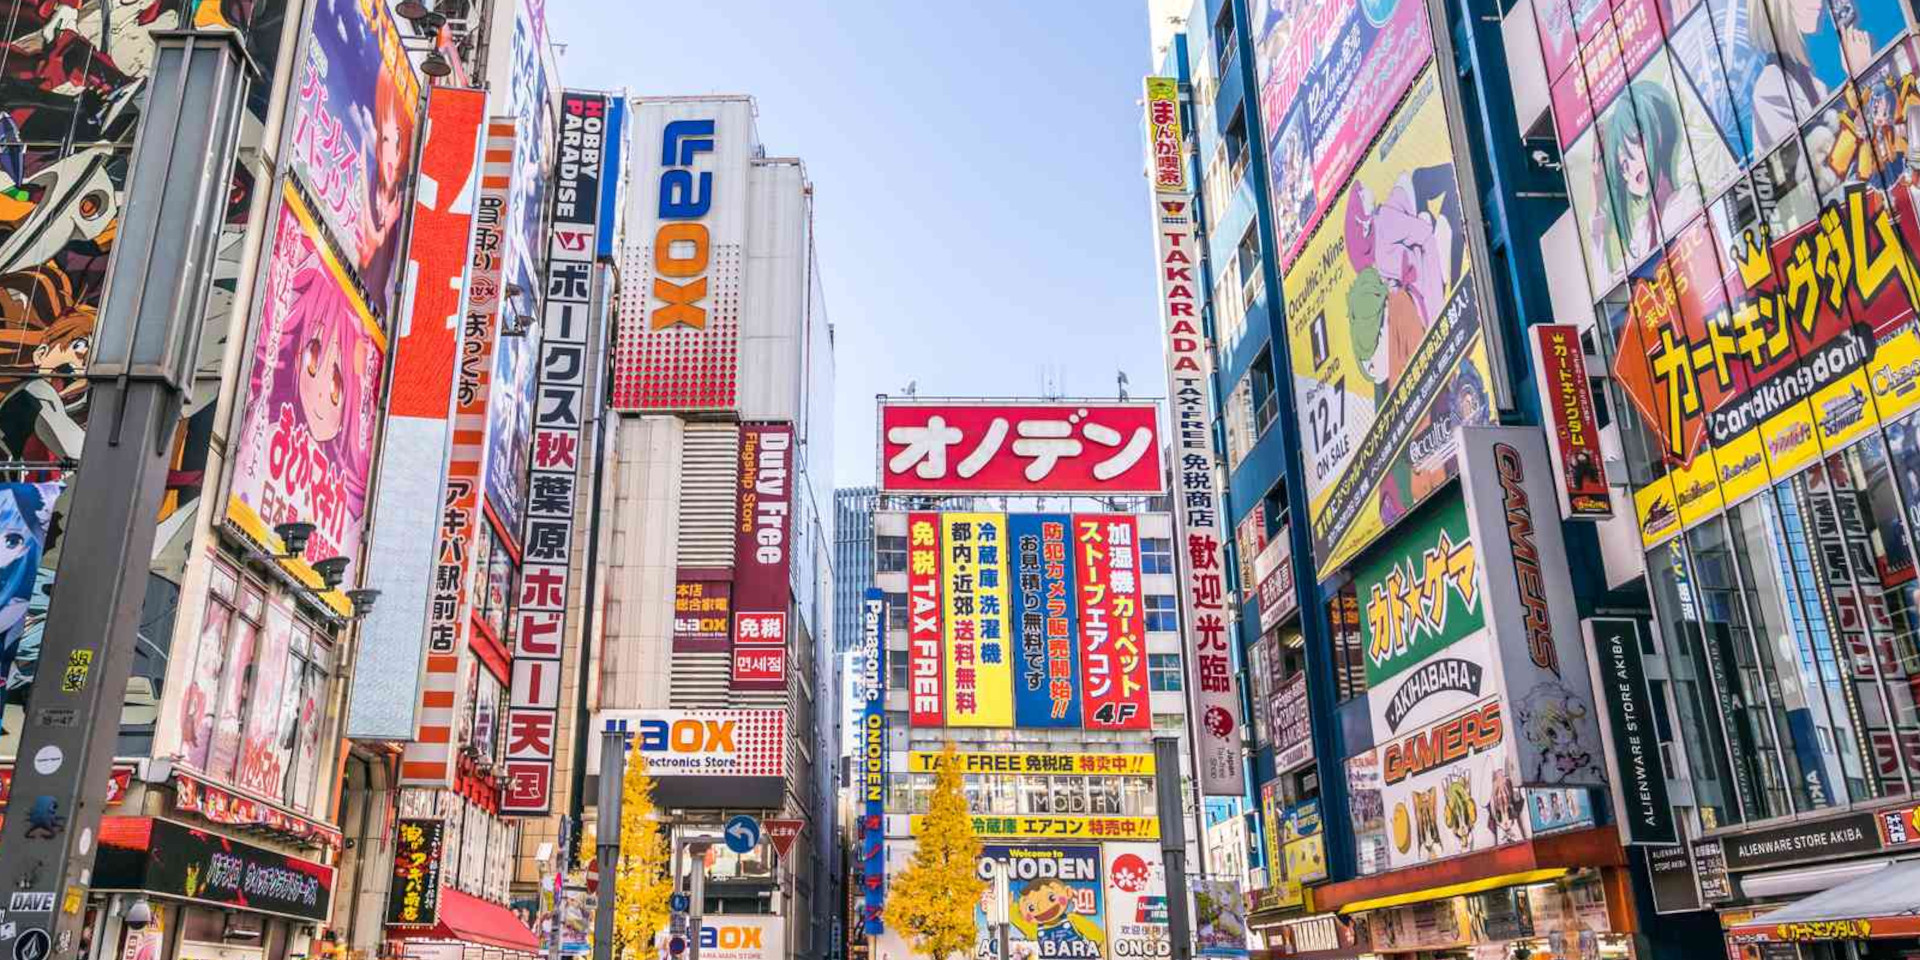 japan anime trip packages